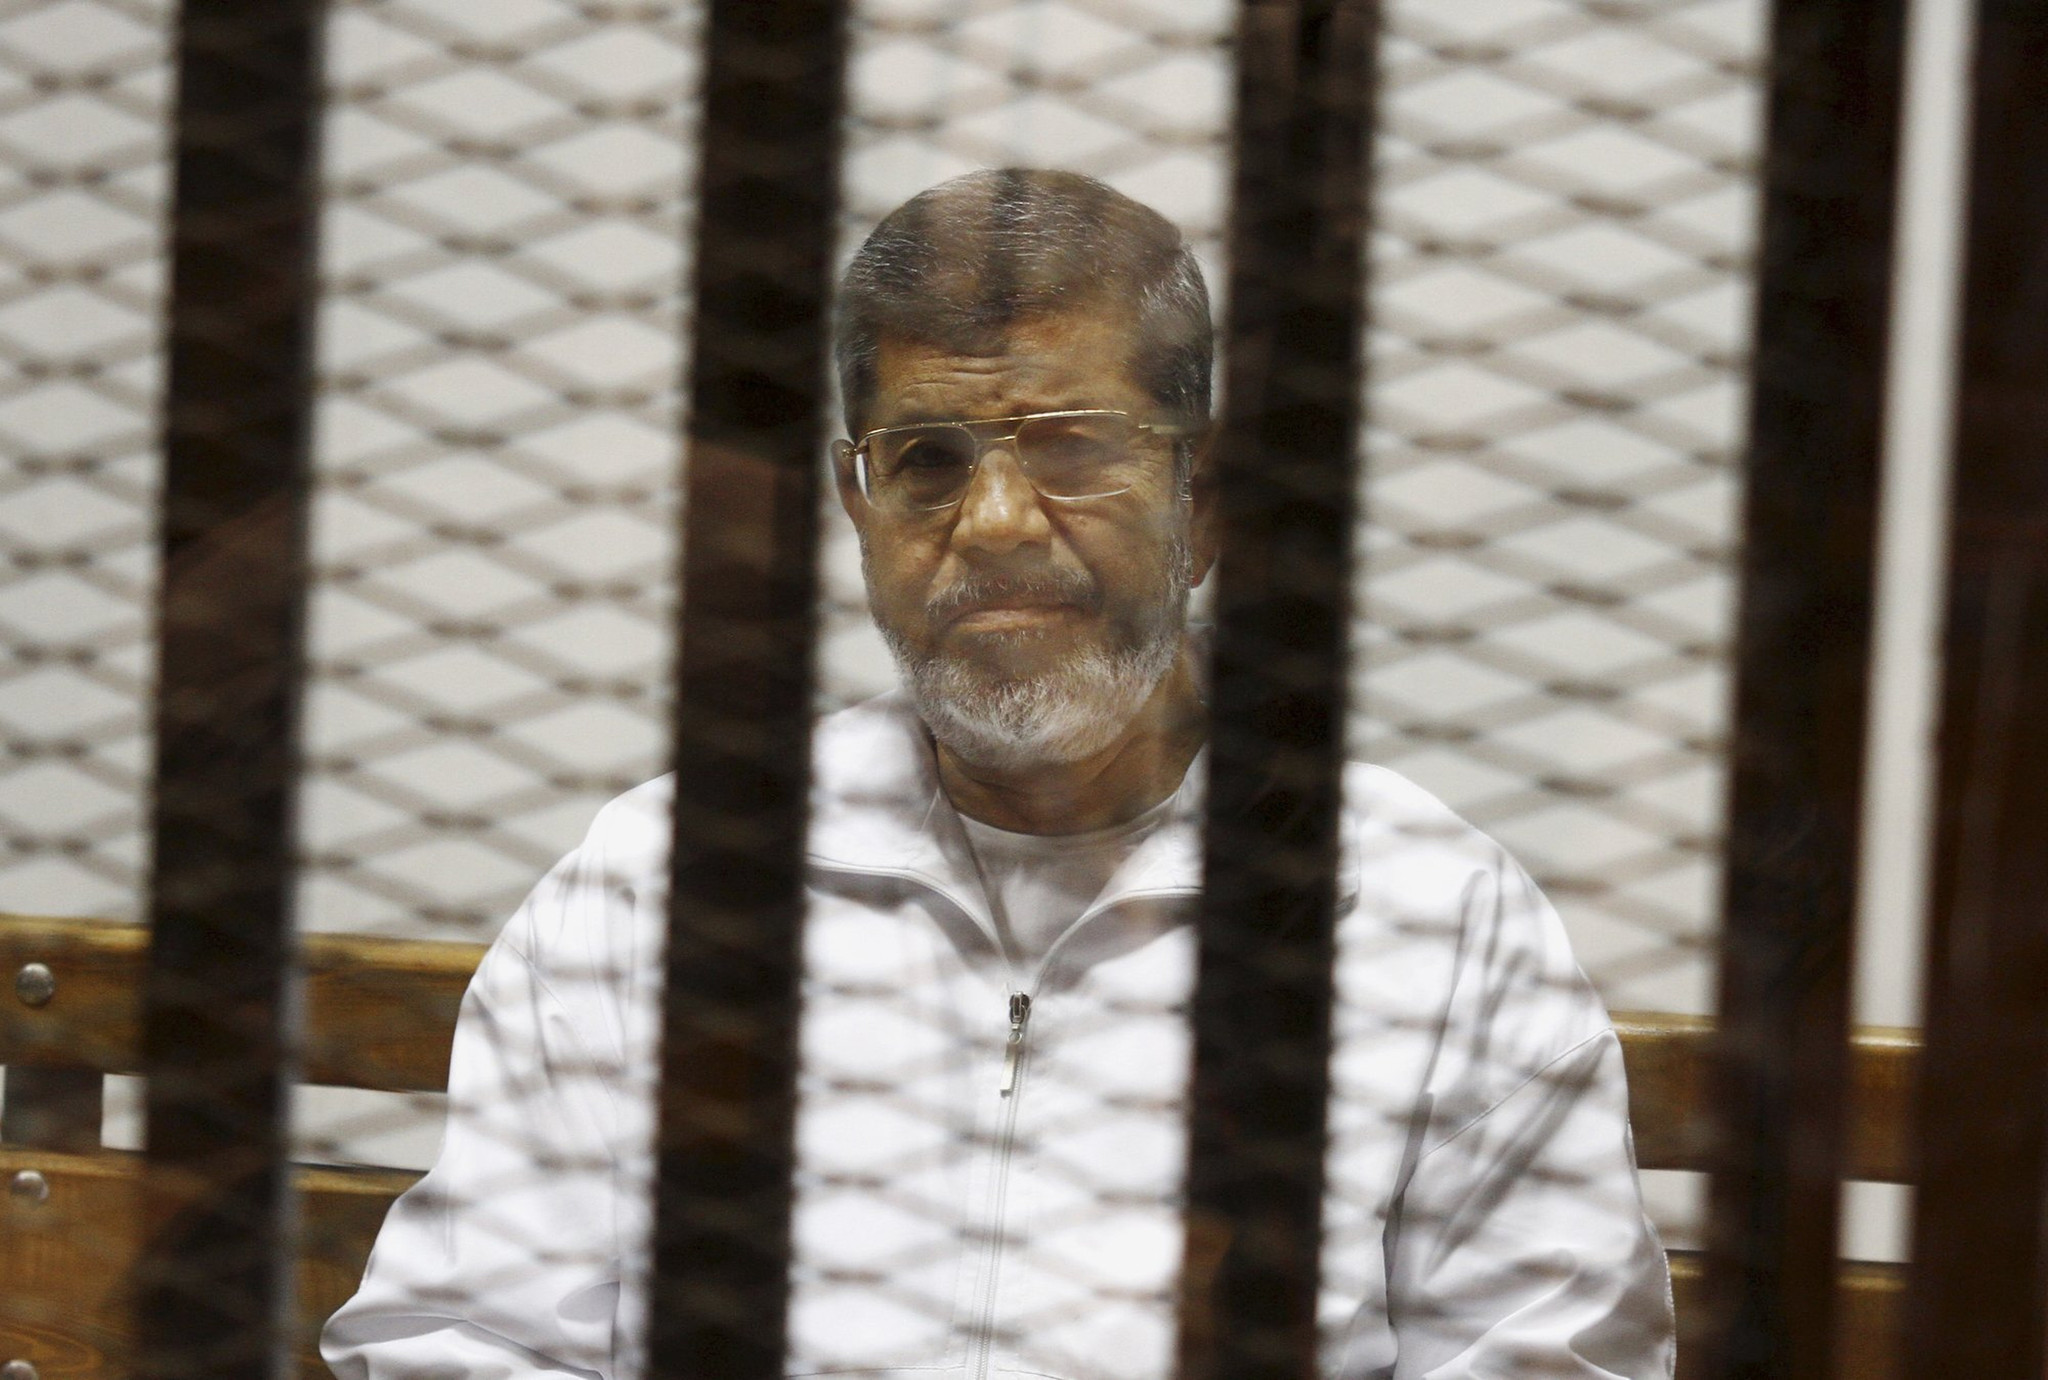 Egypt's Morsi gets 20-year term in fresh sign of movement's demise